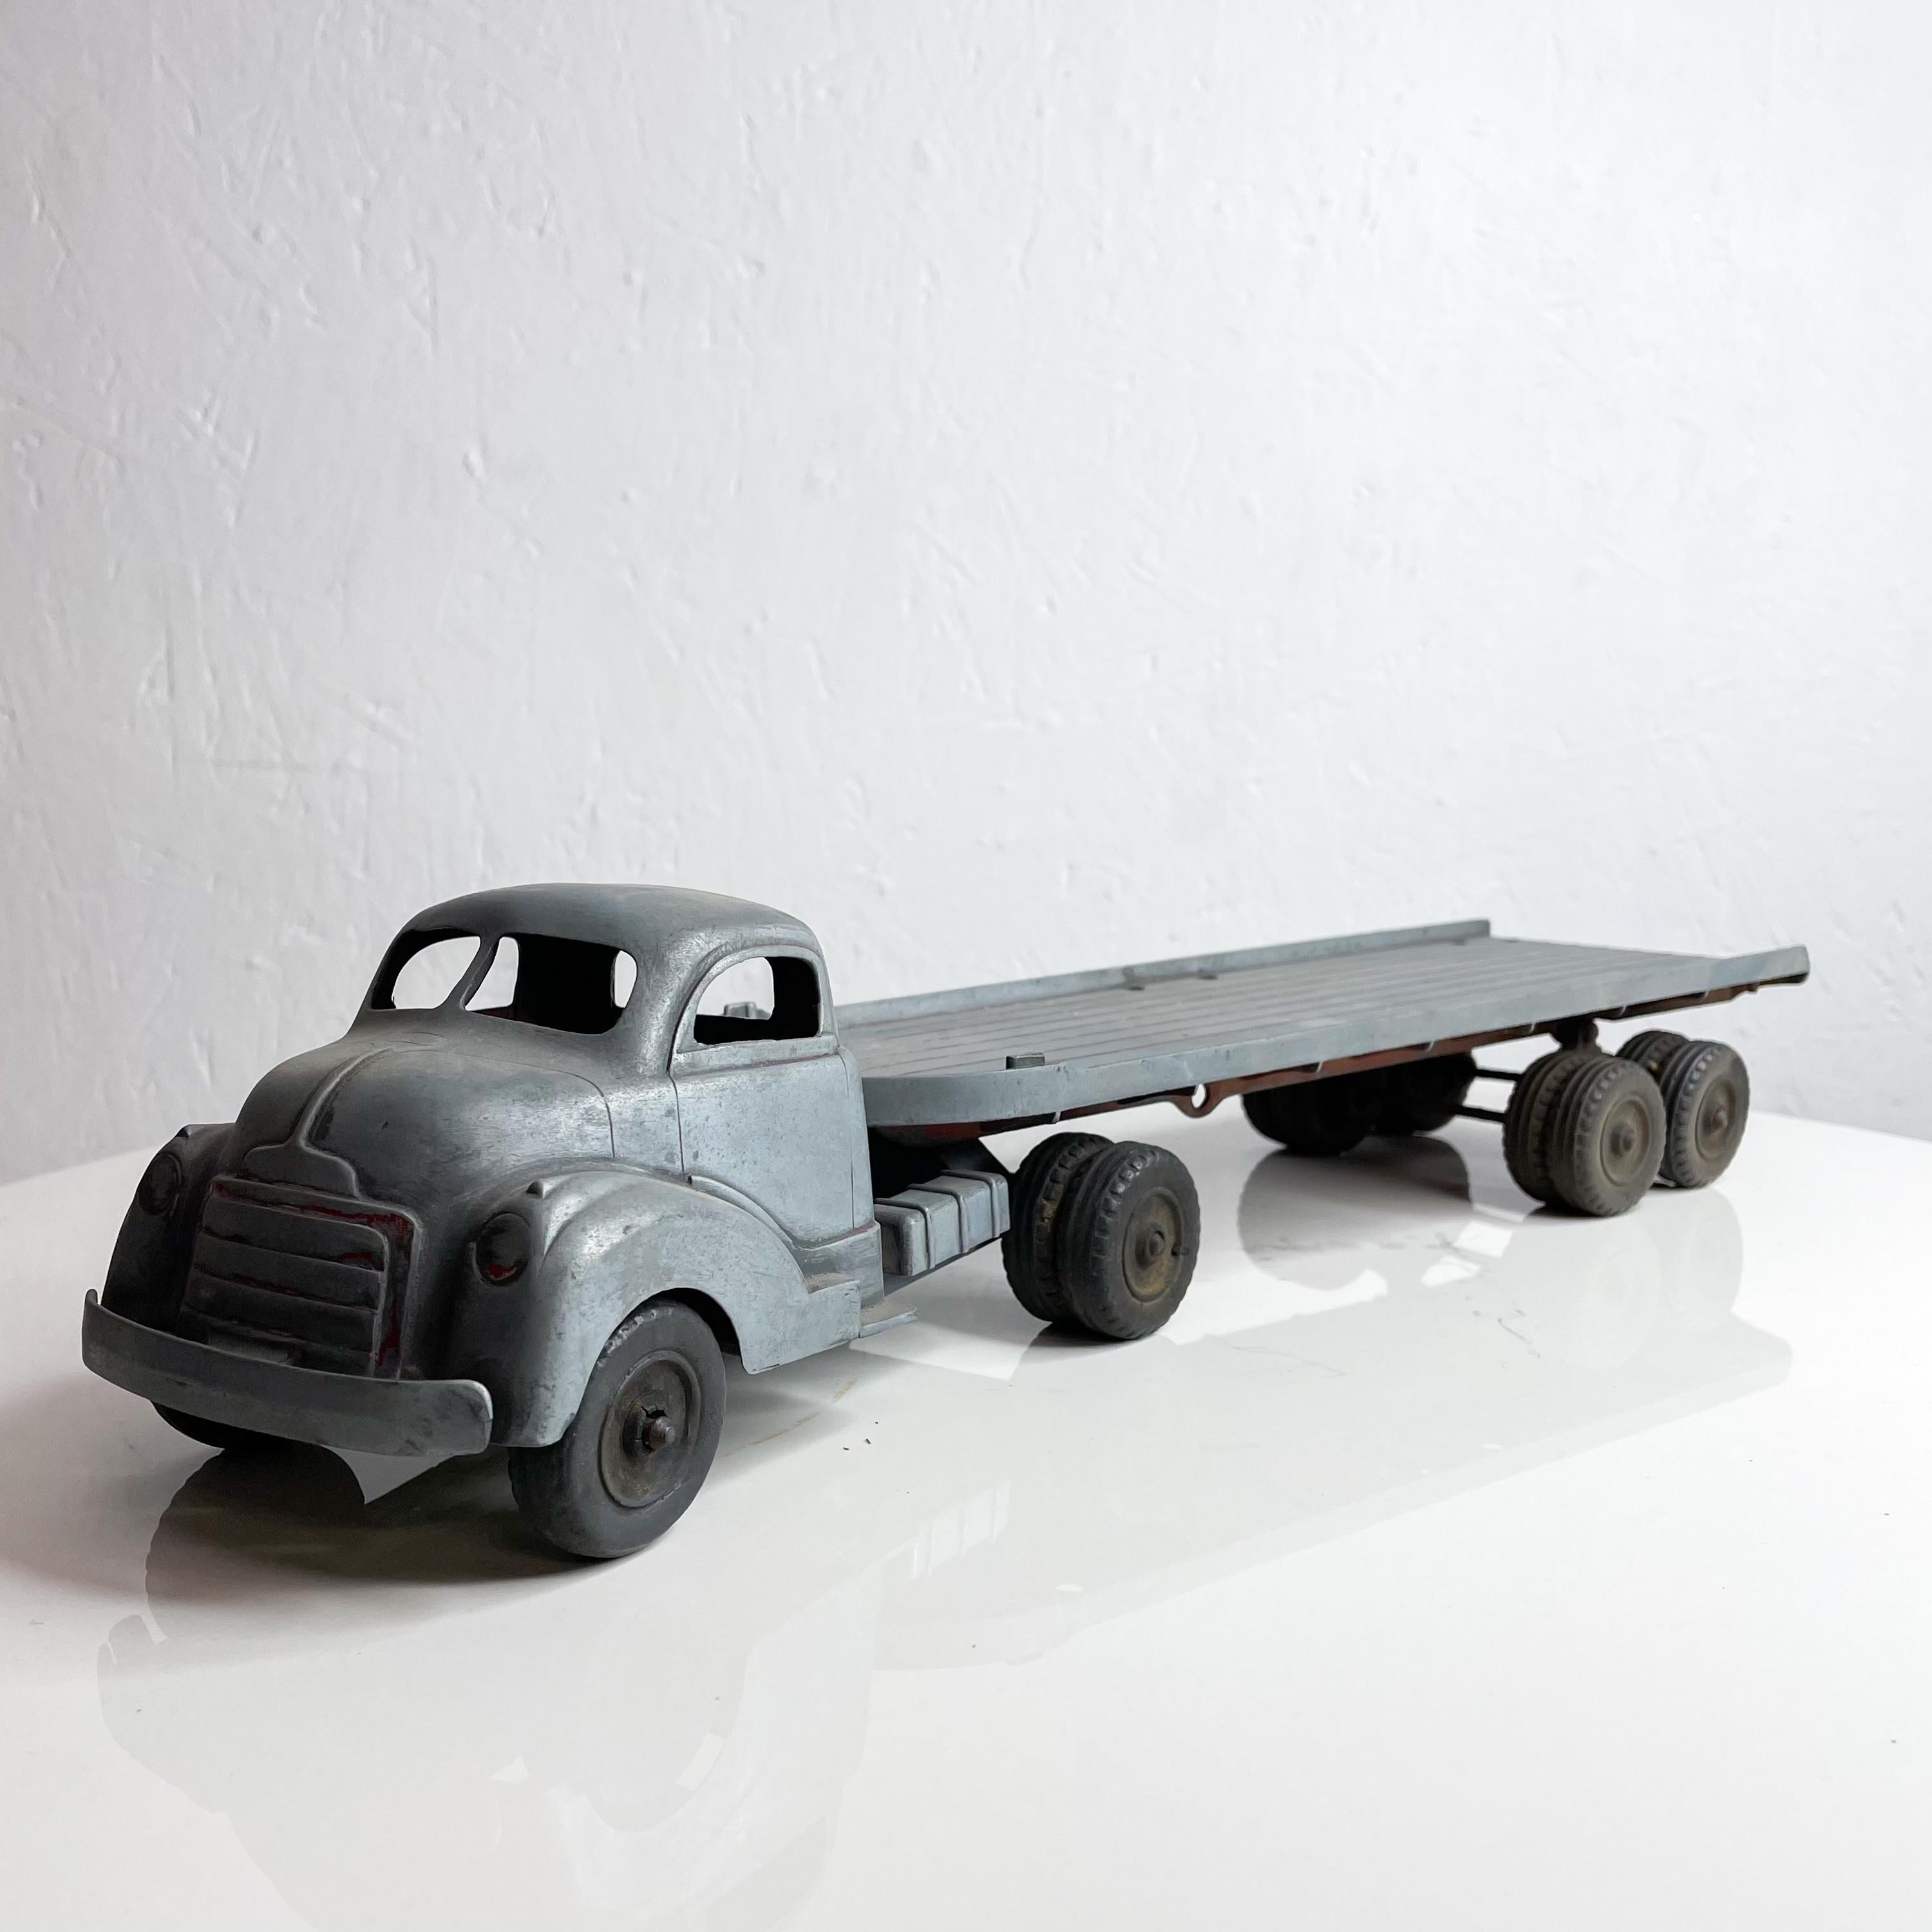 Fab 1950s Vintage toy stake metal truck 14 wheeler super long open flat bed trailer cargo loading.
Cool matte gray. Paint originally Red now matte gray. Big rubber tires.
Attributed to HUBLEY. Unable to verify stamp.
Measures: 17.5 length x 4.25